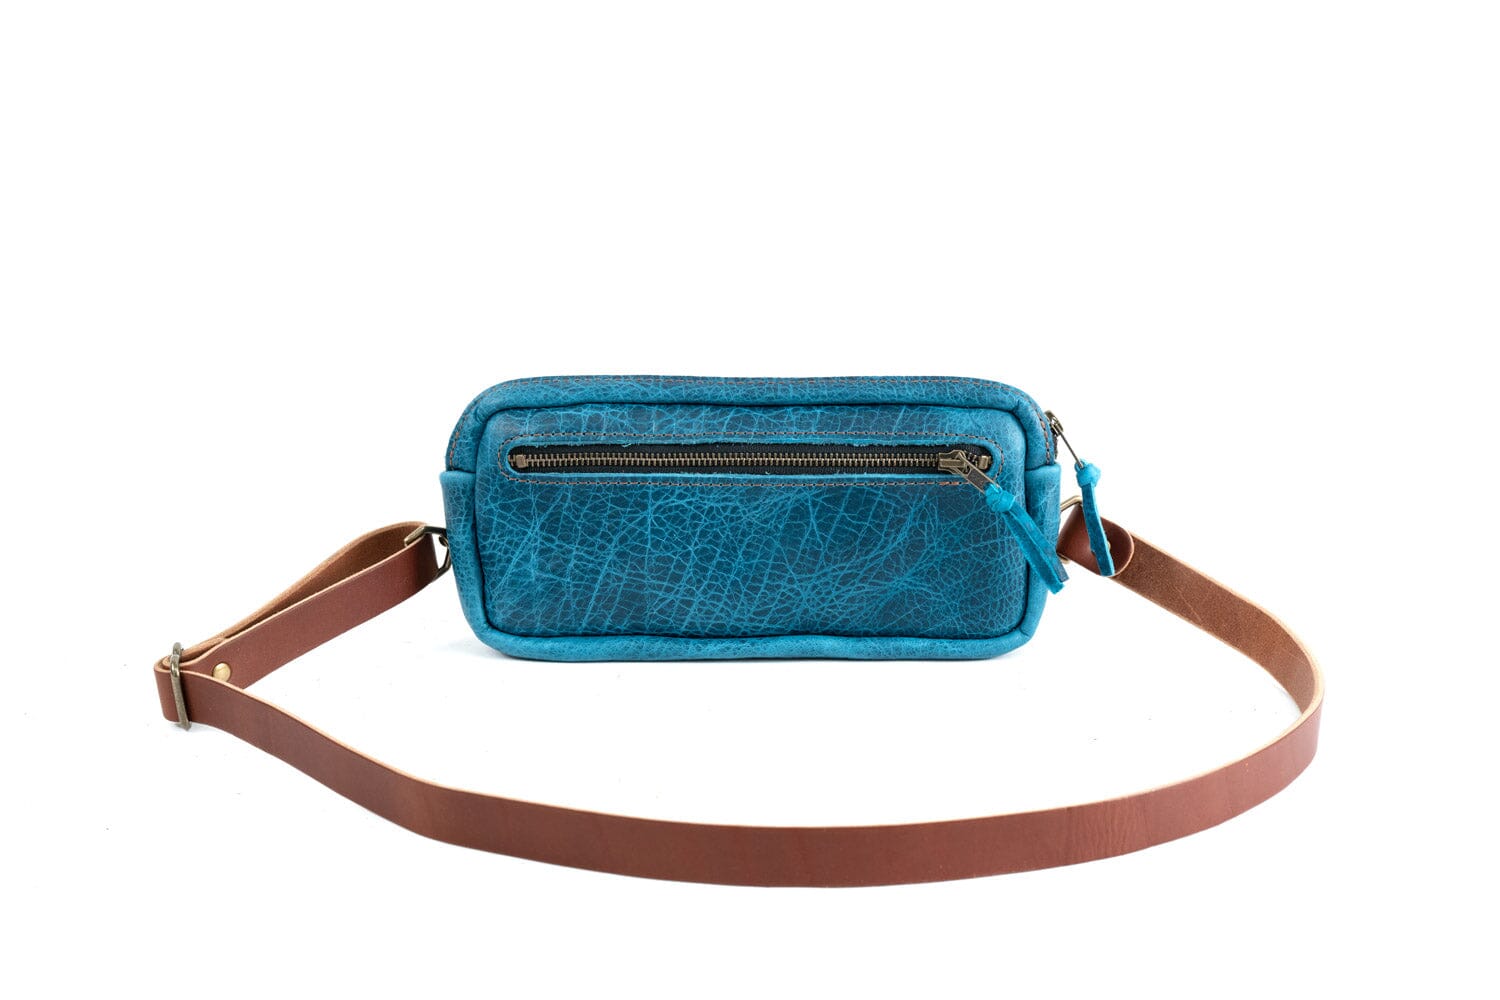 LEATHER FANNY PACK / LEATHER WAIST BAG - DELUXE